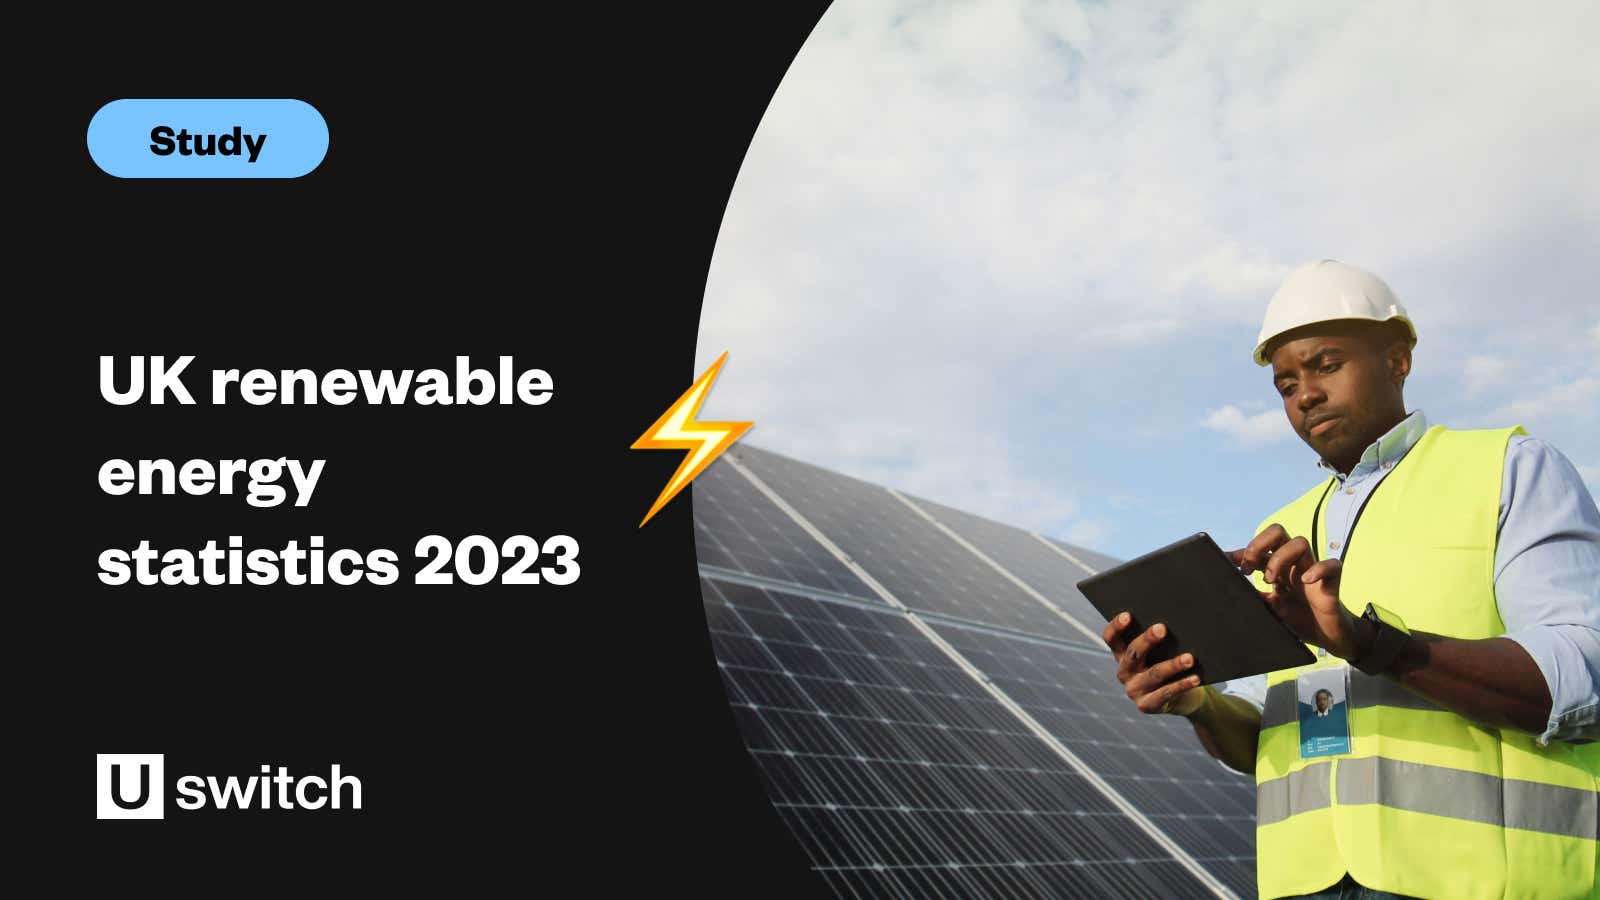 Banner image with the title - UK renewable energy statistics 2023